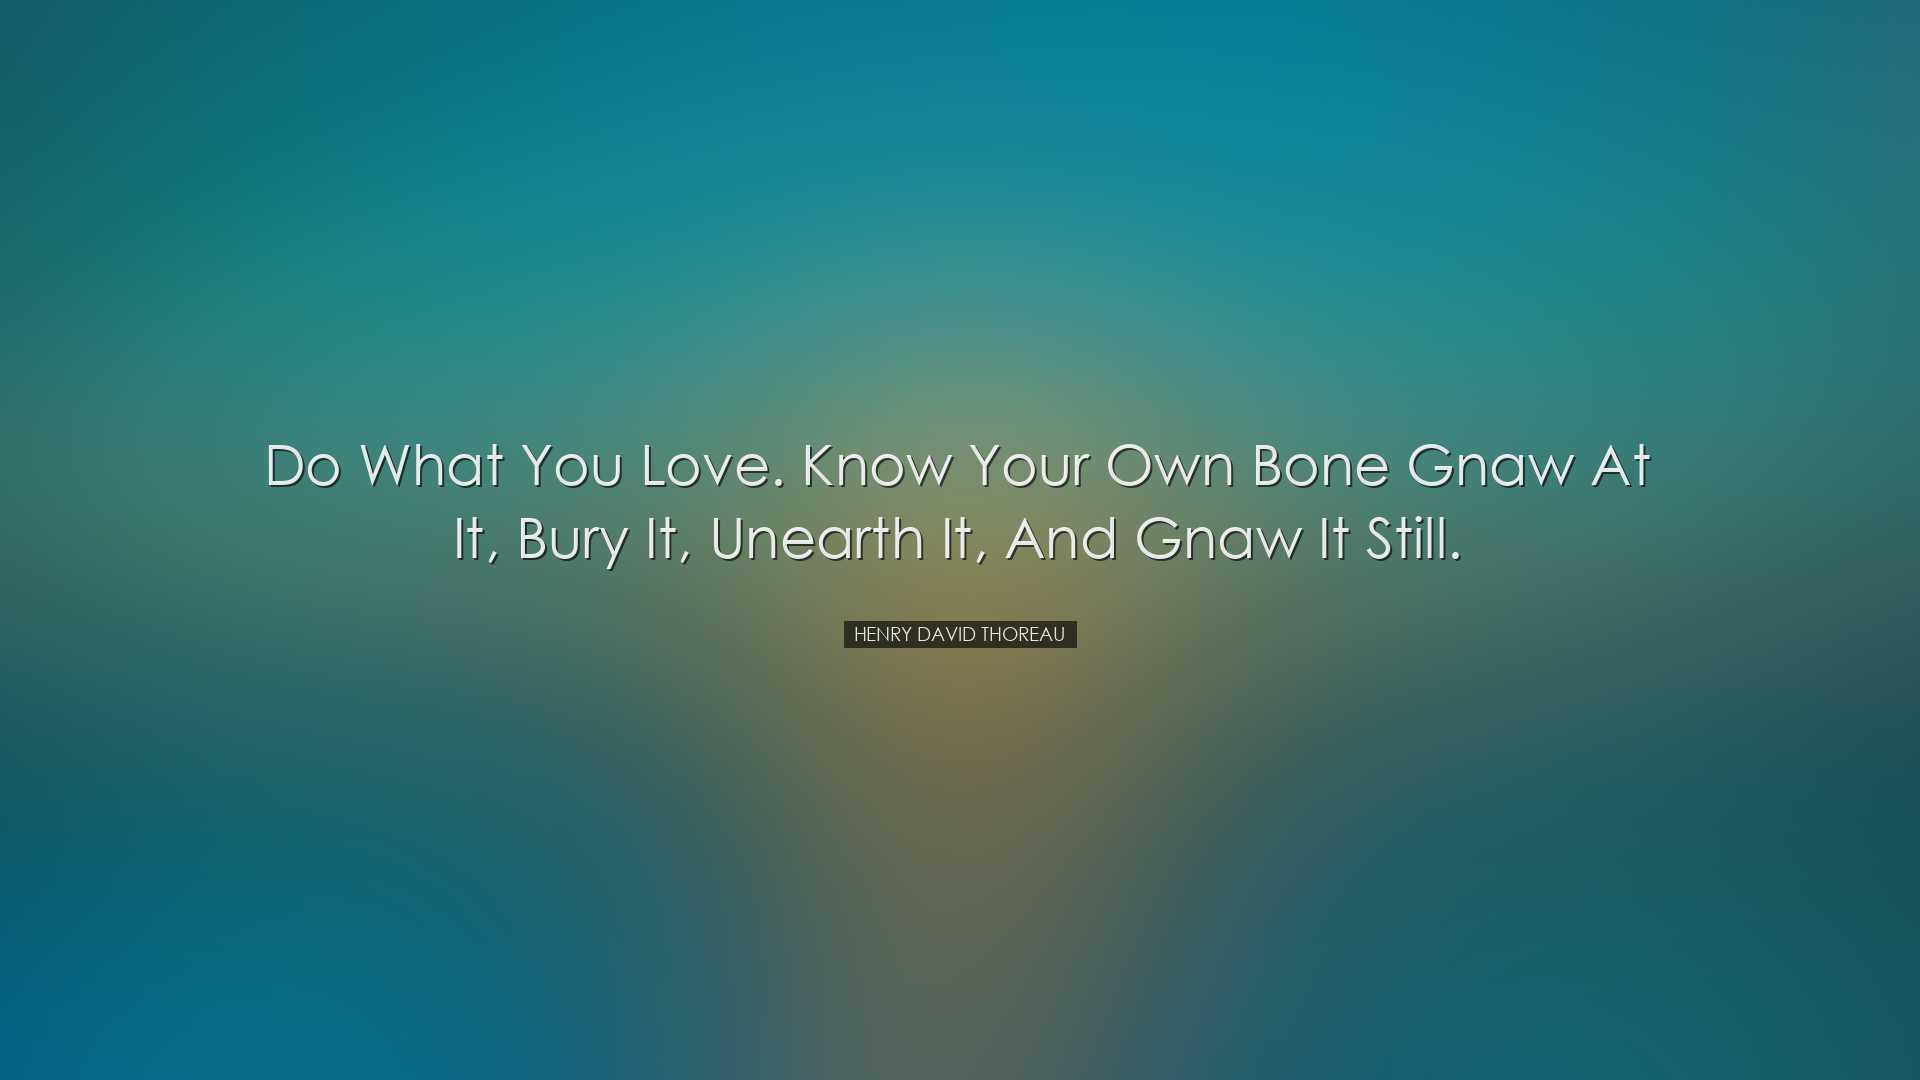 Do what you love. Know your own bone gnaw at it, bury it, unearth